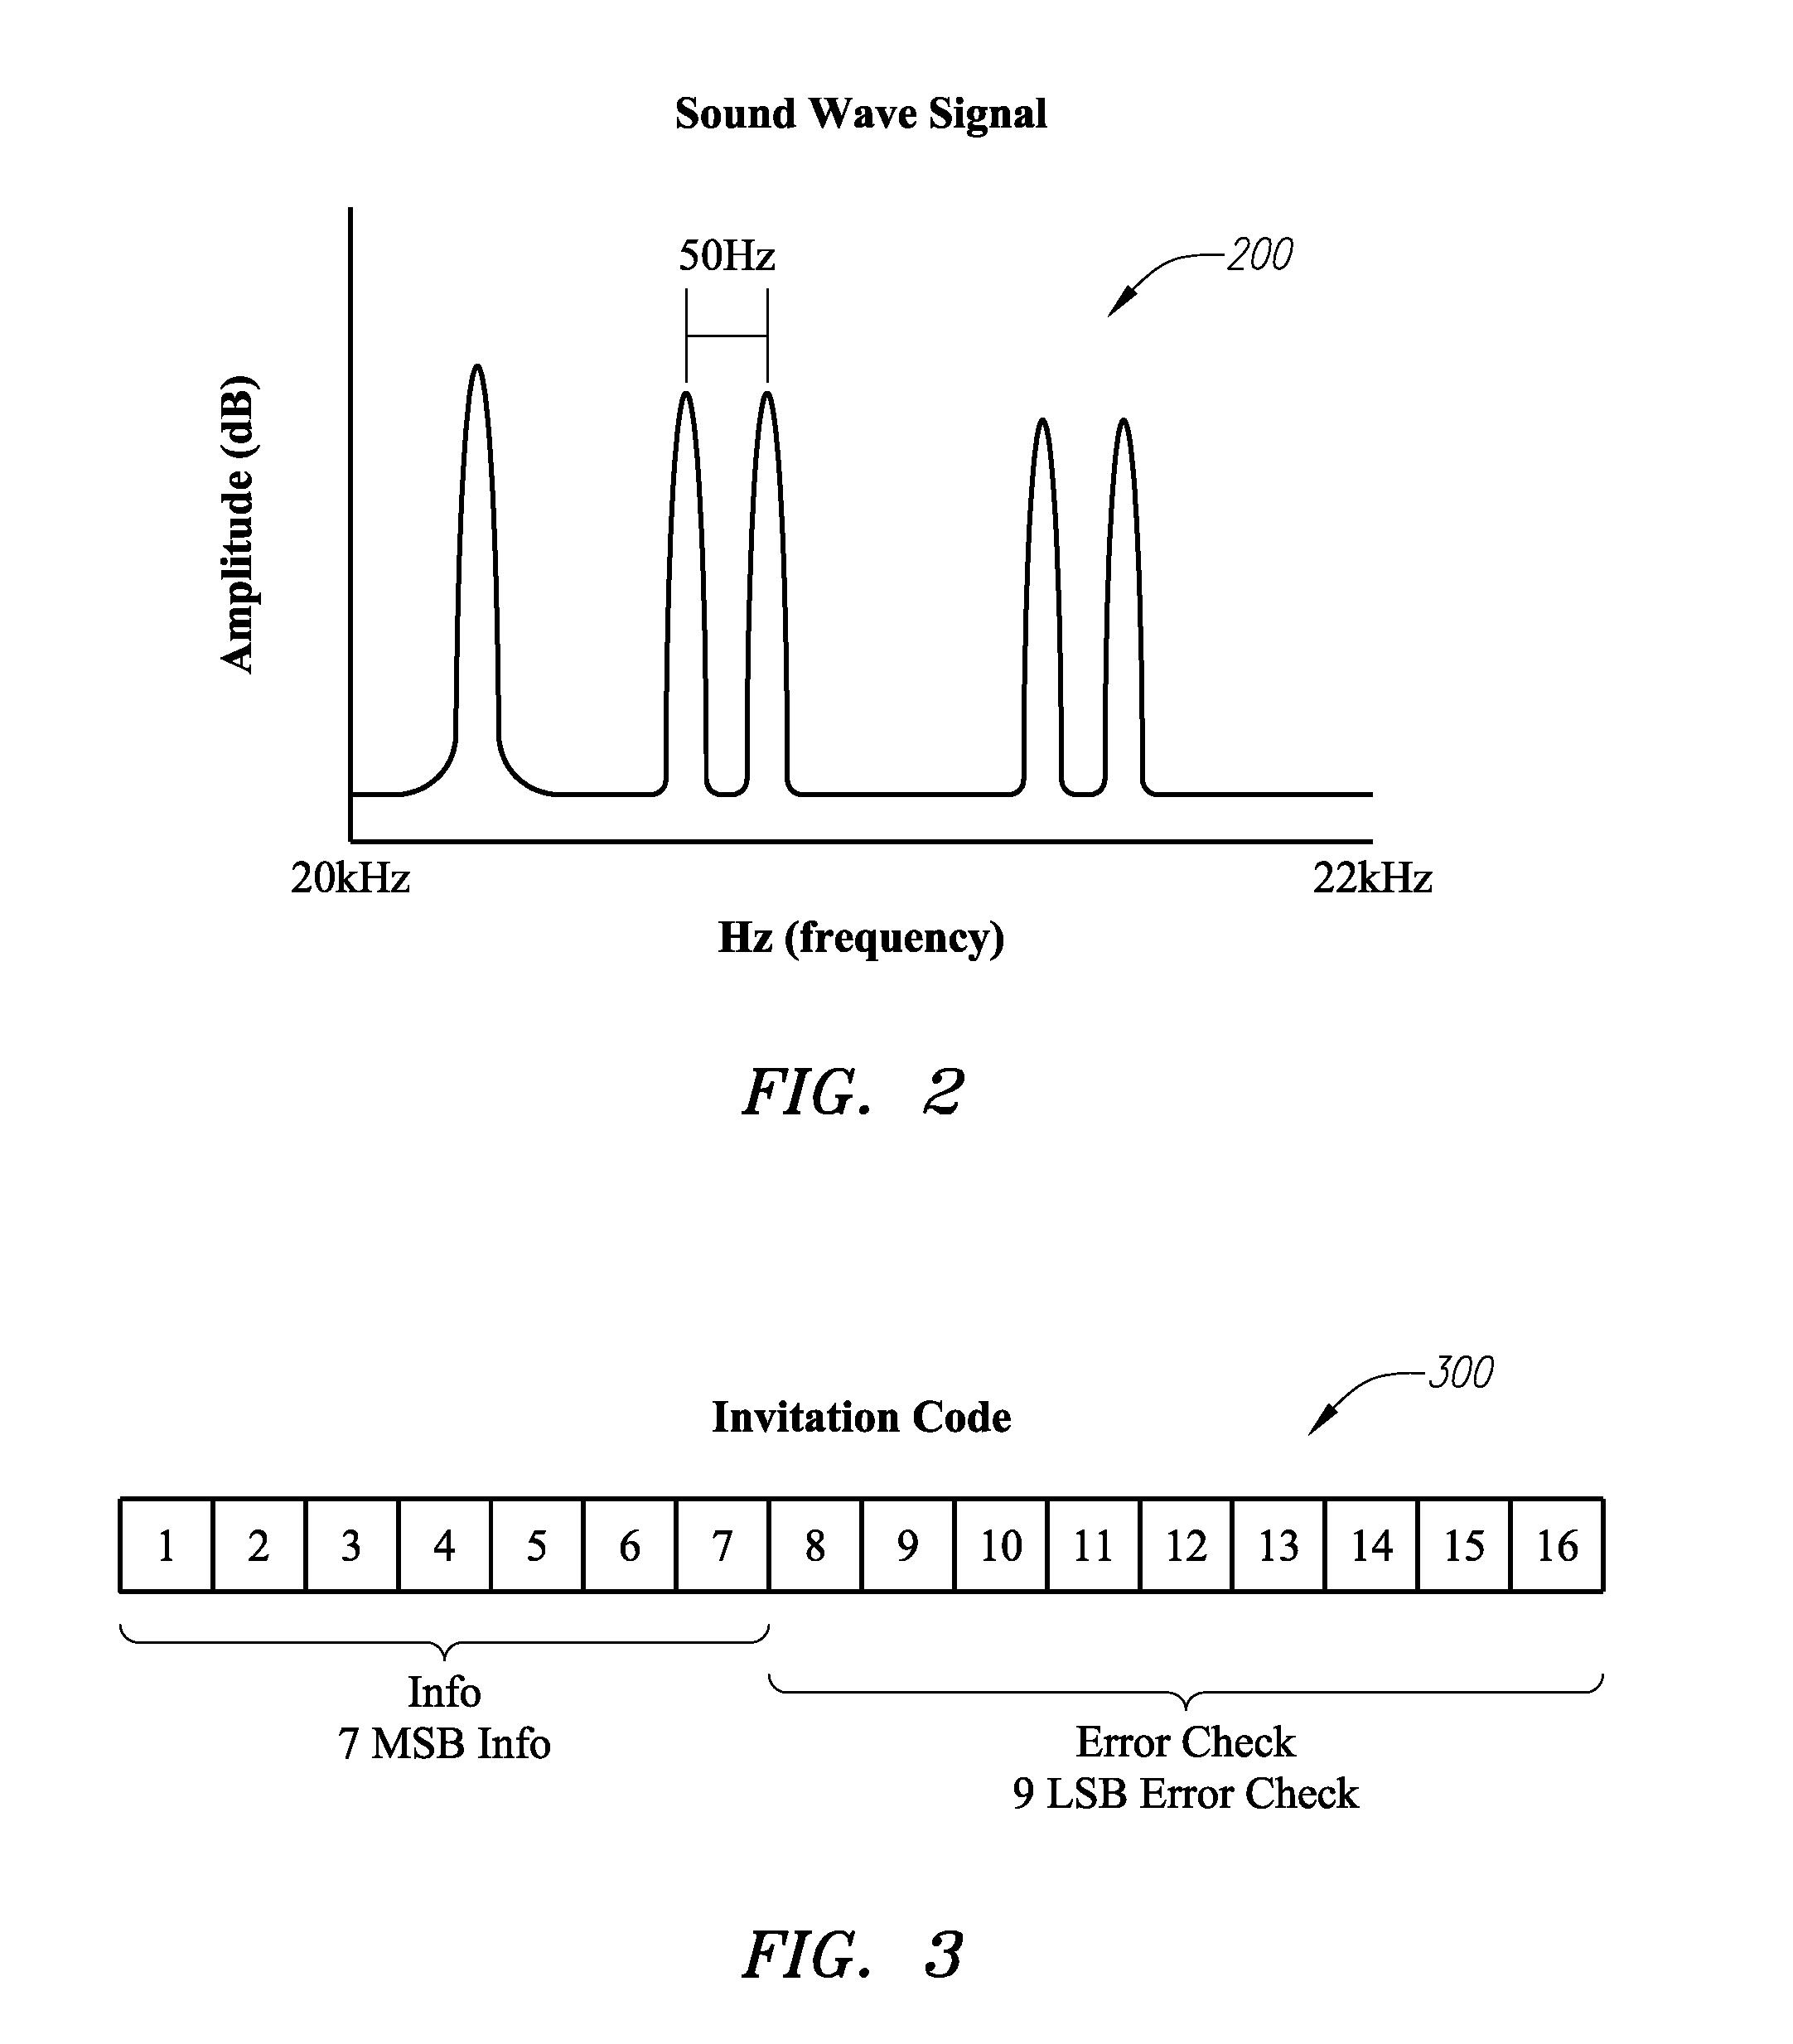 Methods and apparatuses for communication between devices